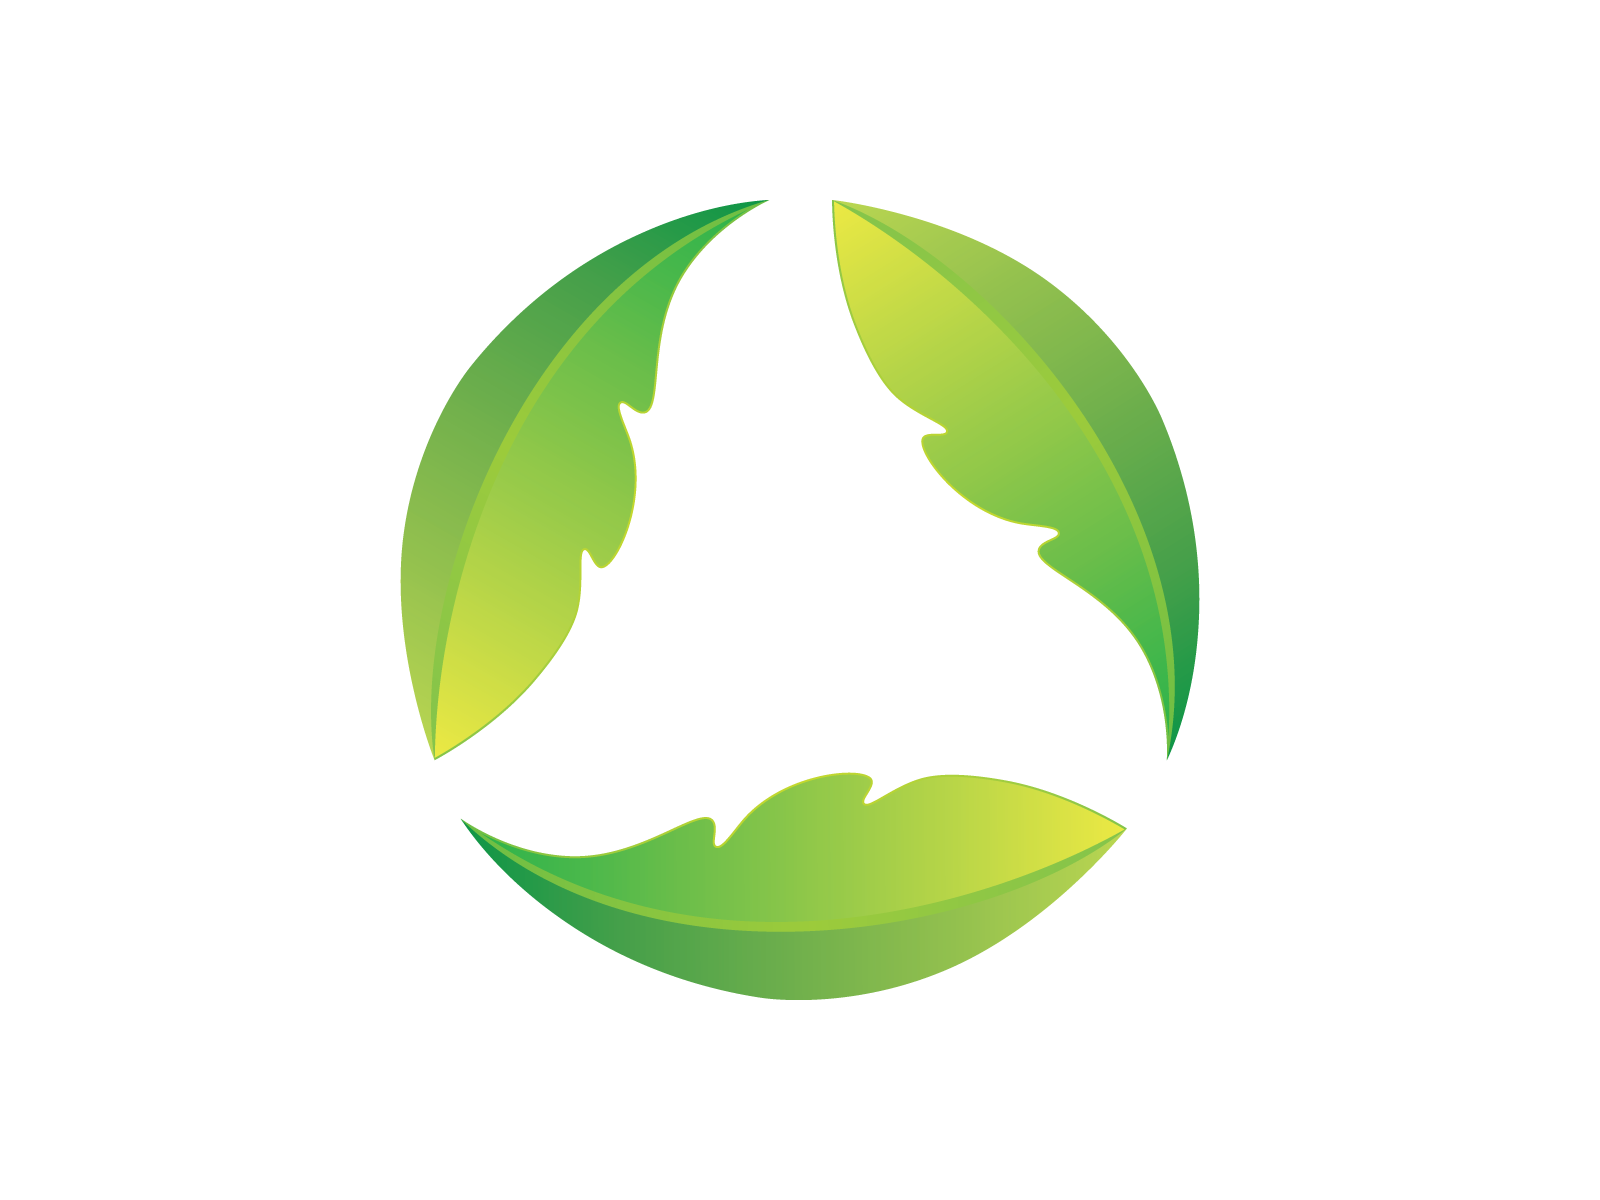 Organic Green Leaves Circle Logo Design By Ilarion Ananiev By